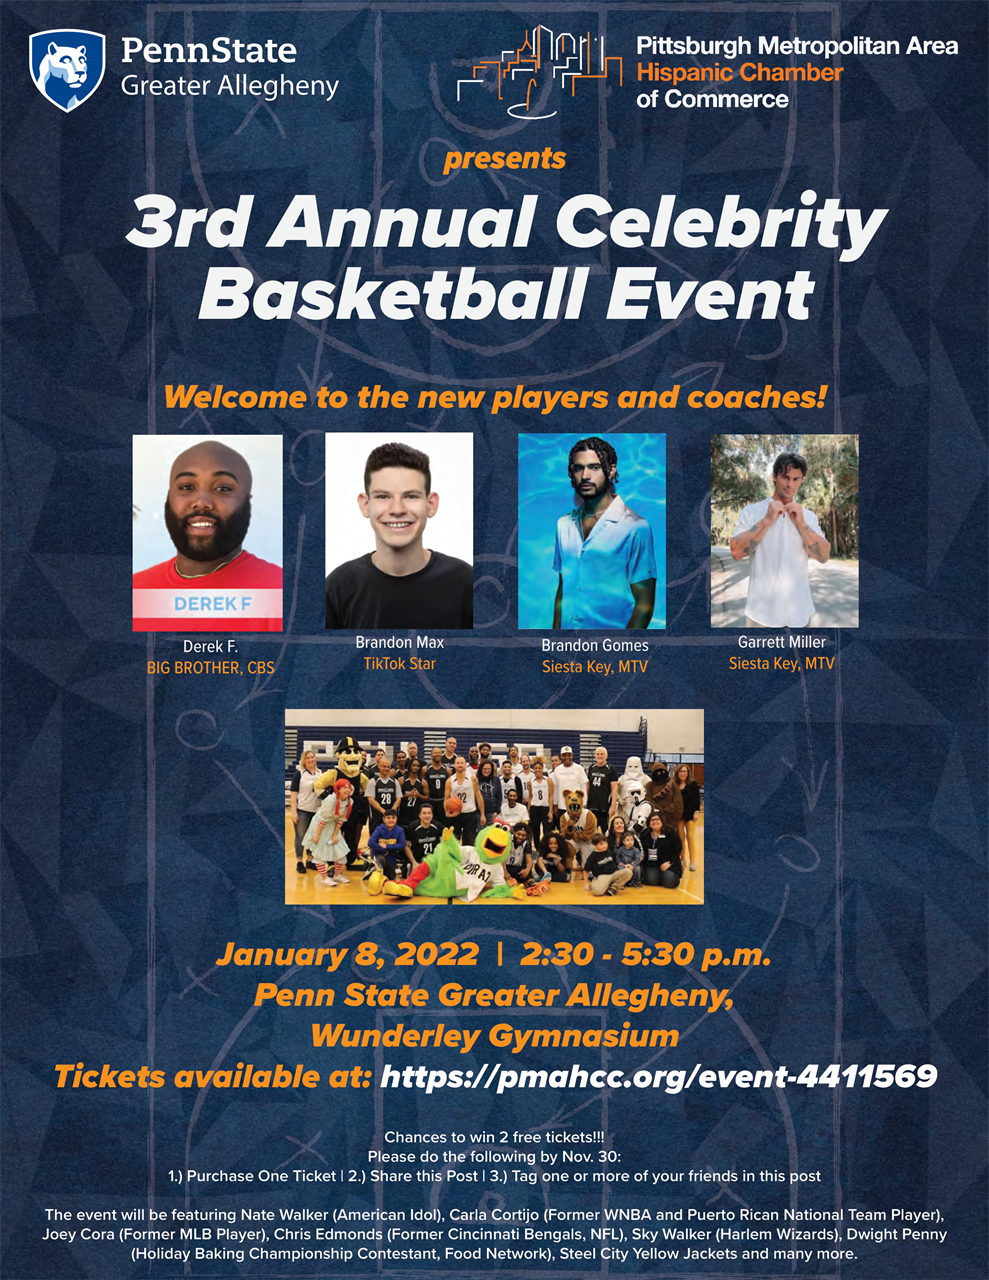 https://www.pmahcc.org/resources/Pictures/Events/2022/Celebrity%20Charity%20Basketball%20Game/2022-Celebrity-Basketball-Event-Flyer-1.png